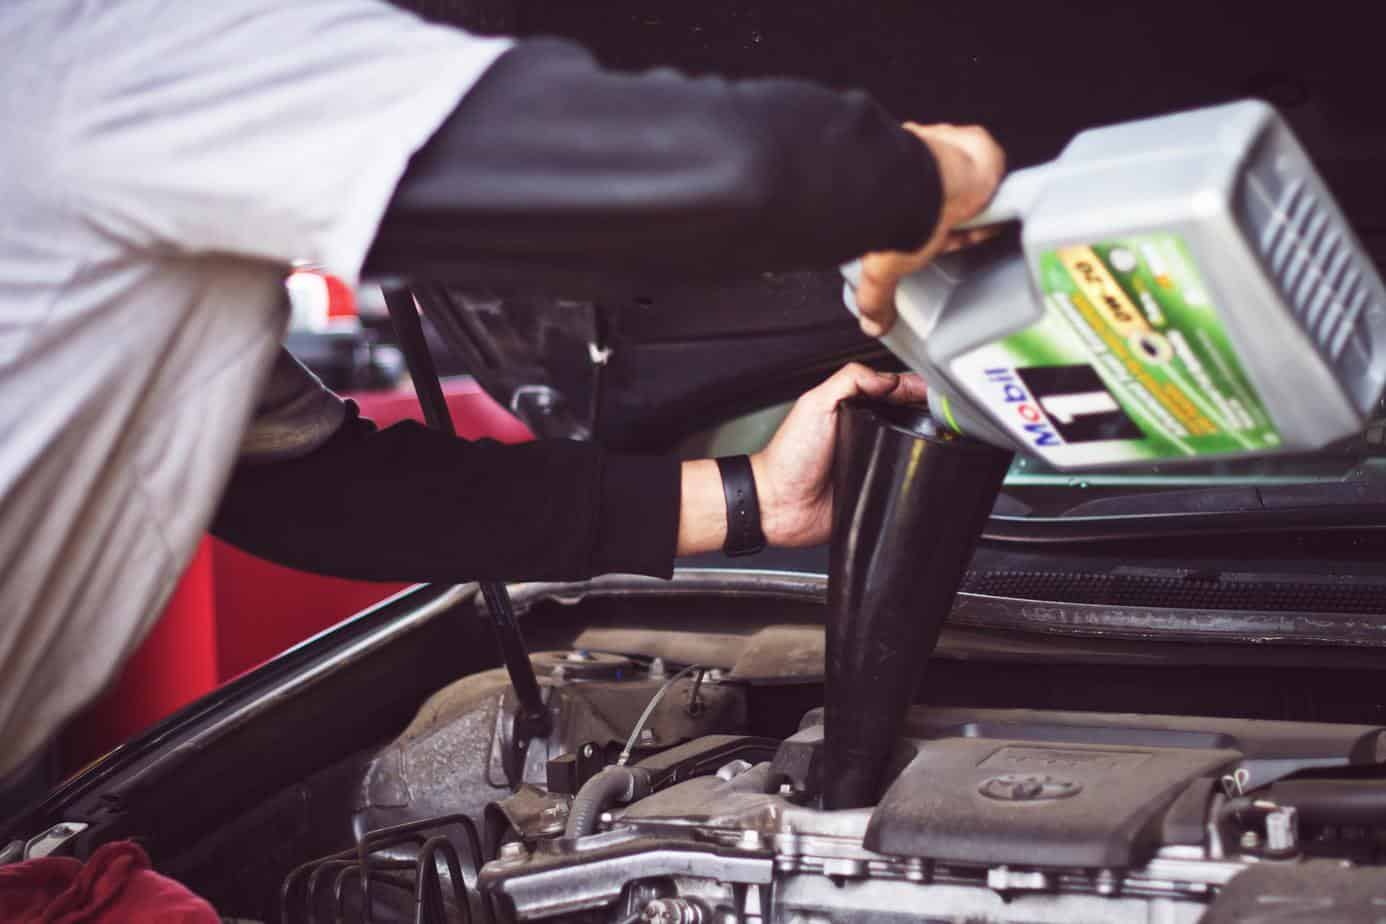 How to check the technical condition of a car before a trip?